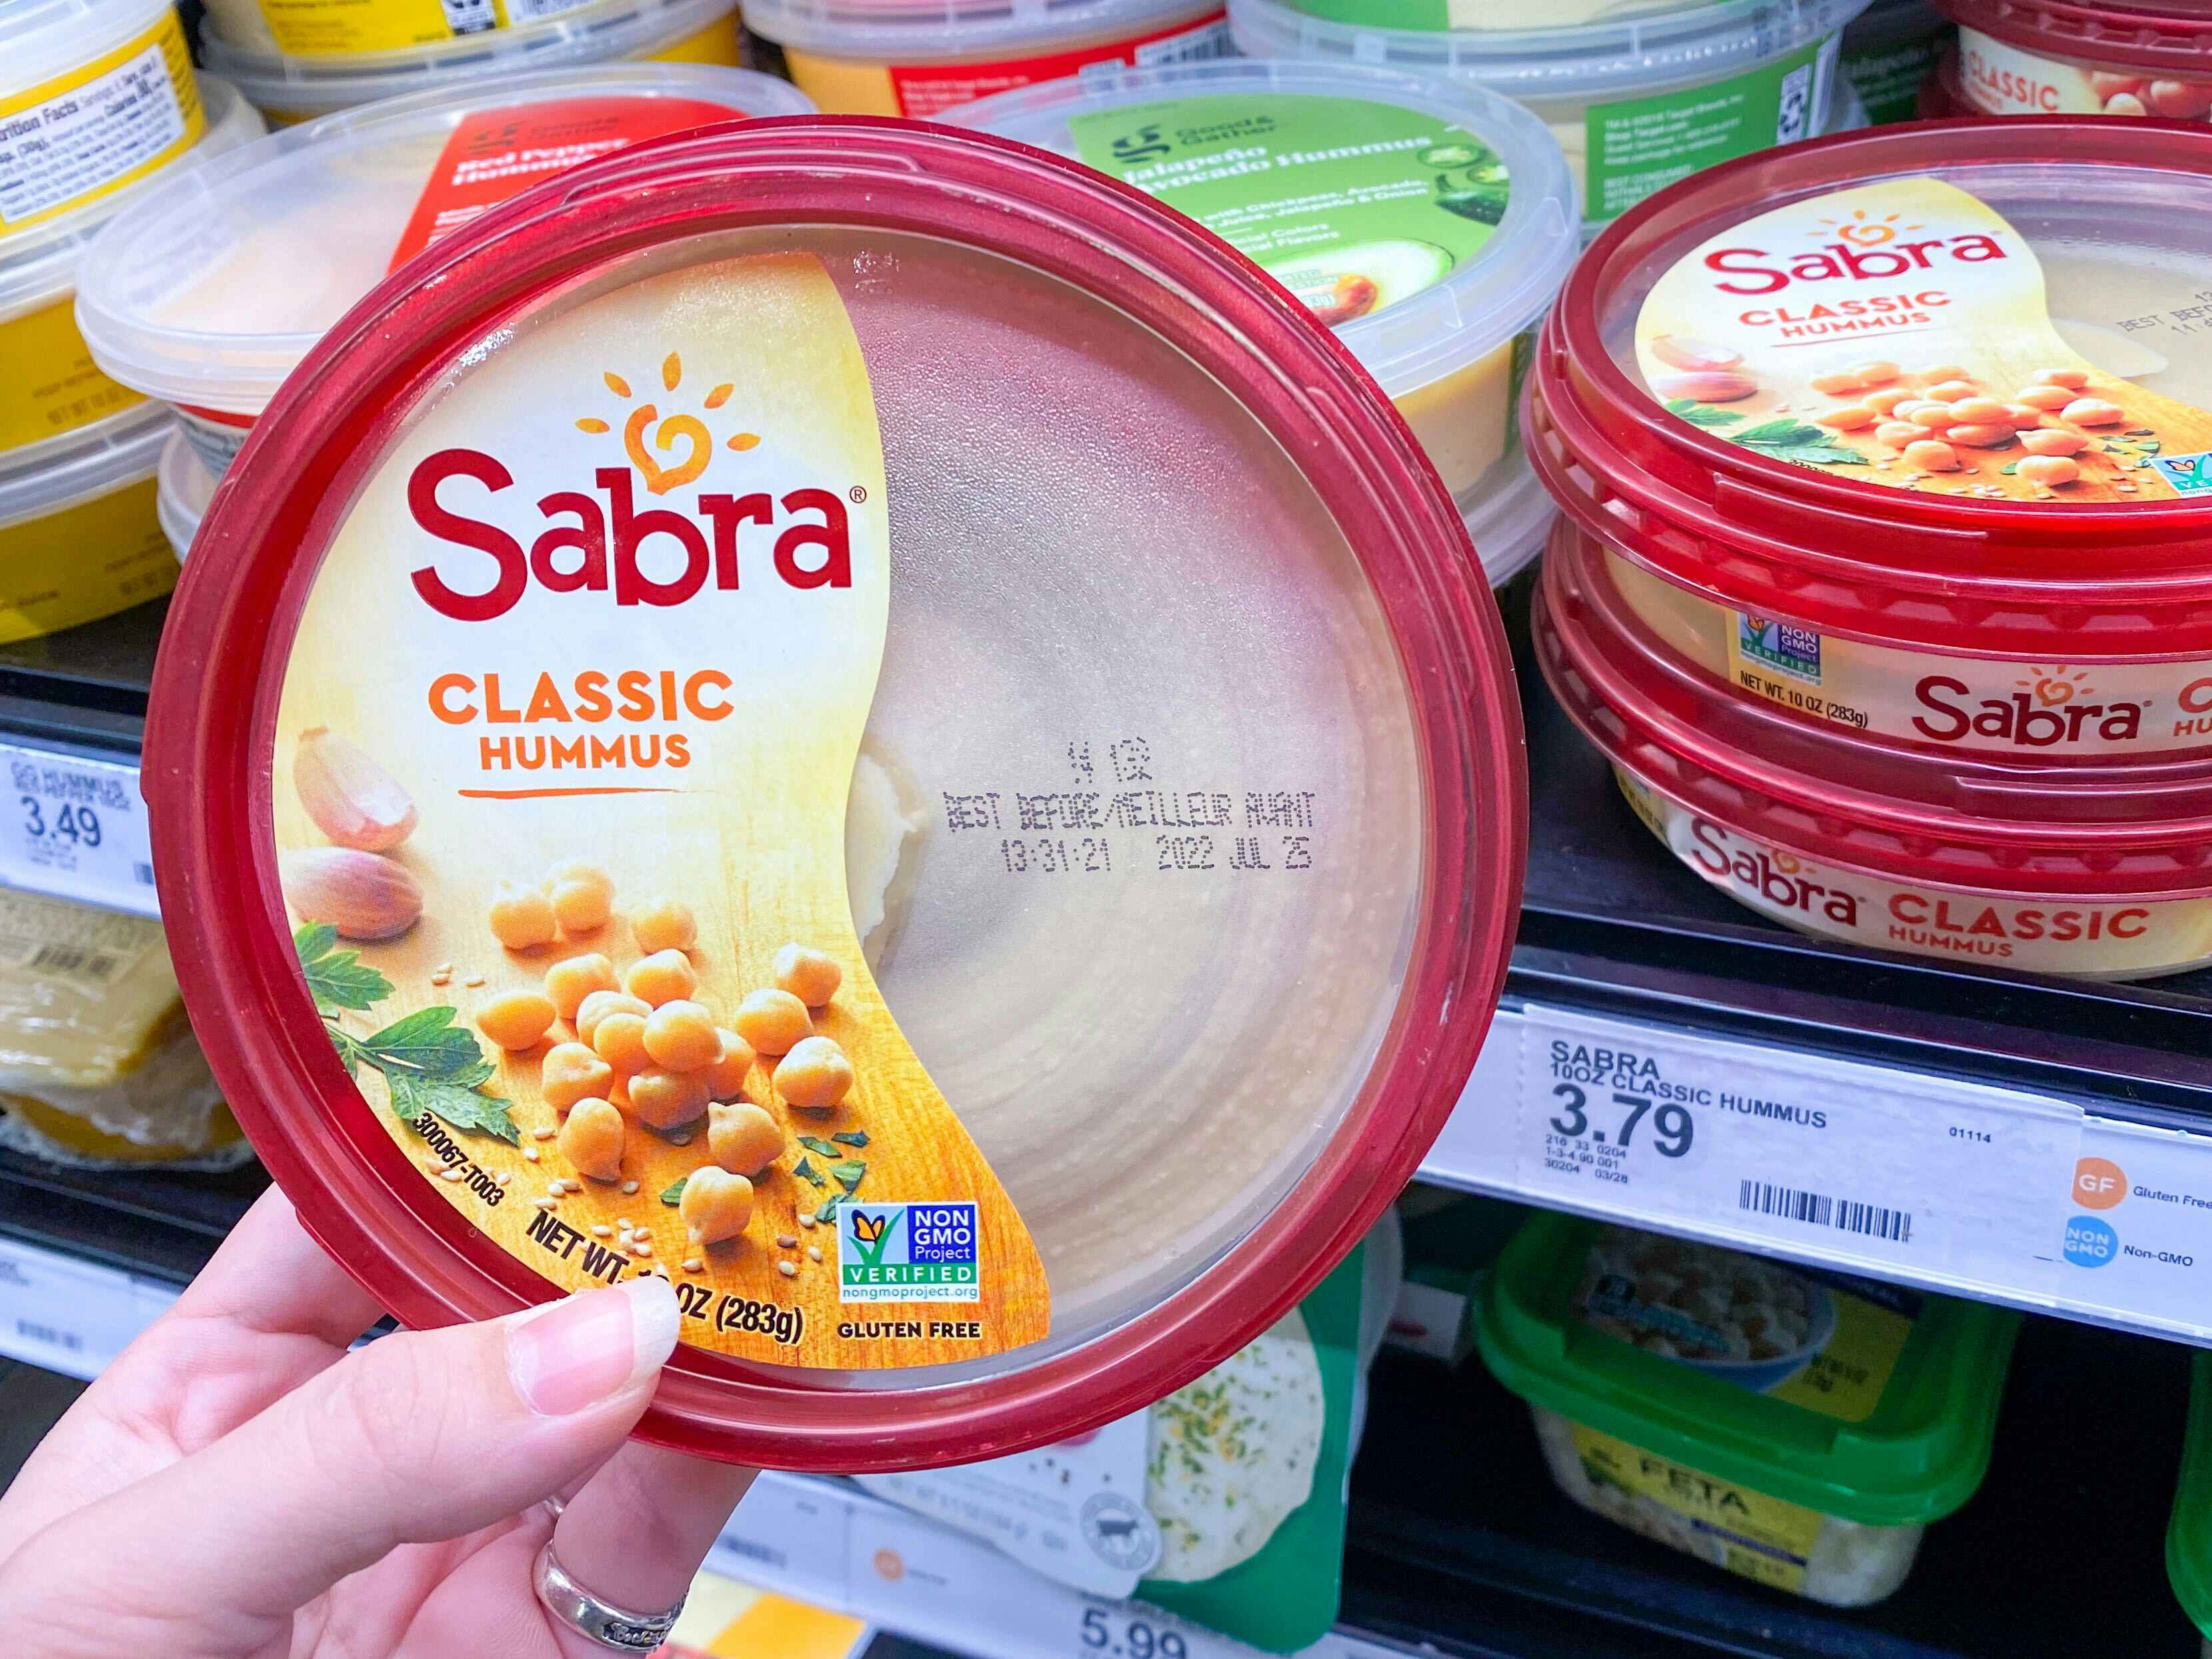 Sabra Classic Hummus held in front of shelf at Target. Price sticker on the shelf reads $3.79.